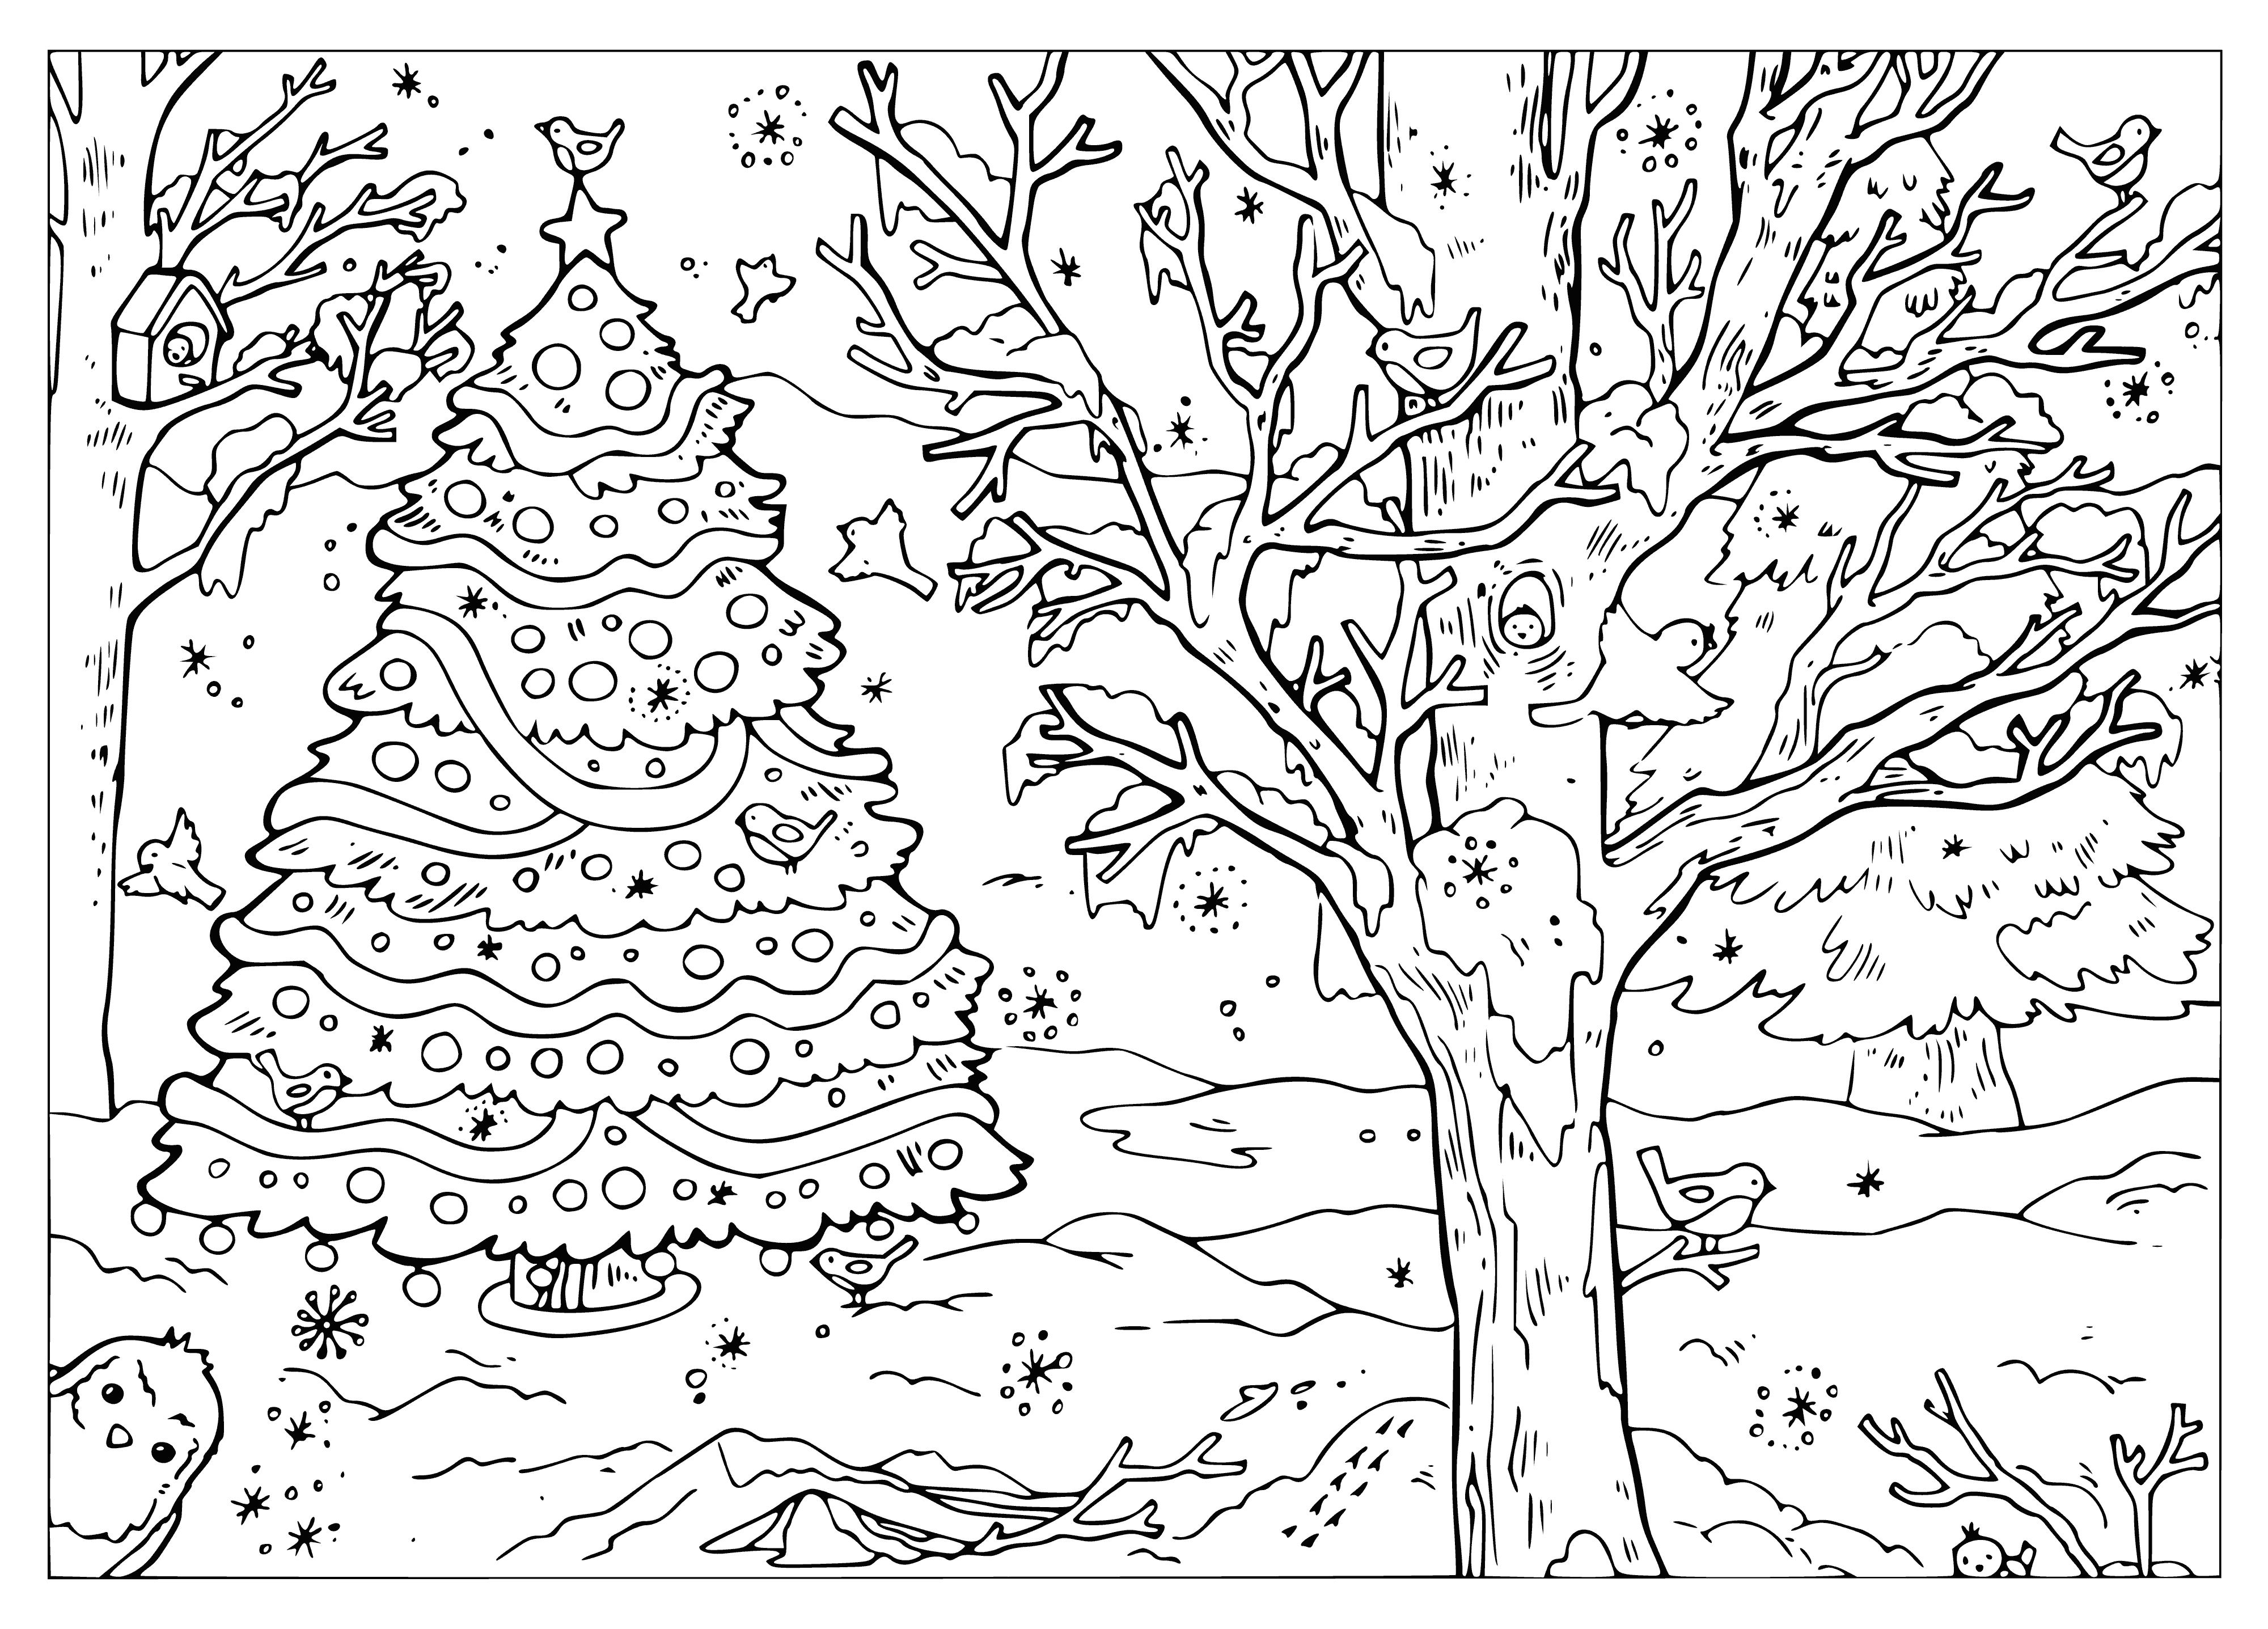 coloring page: Christmas tree in the center, green & decorated w/ red & gold, presents on the bottom, & star on top.